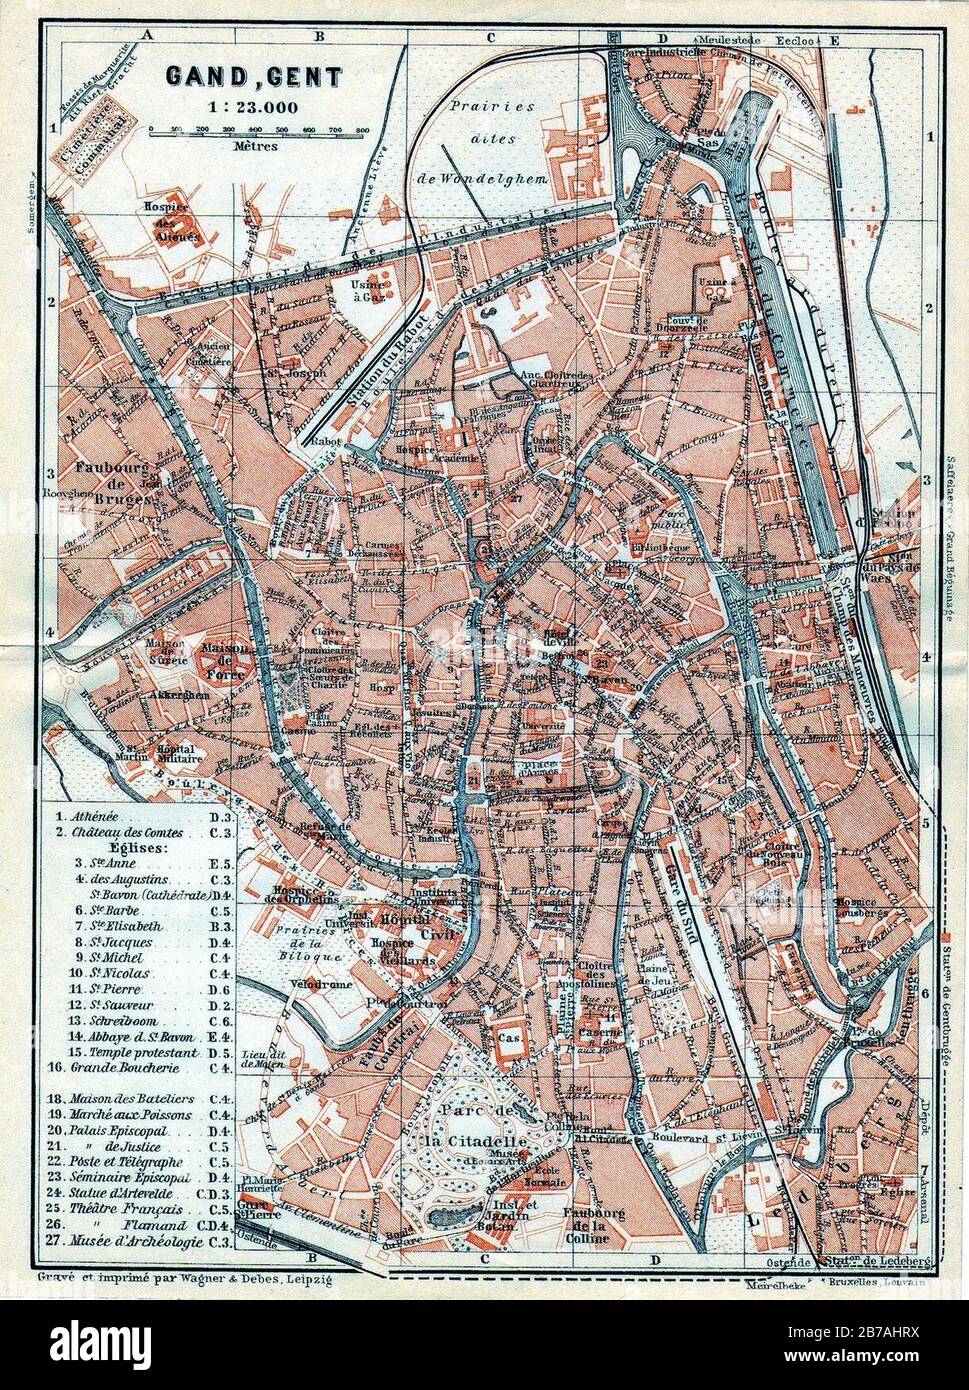 Ghent map, Wagner and Debes, 1910. Stock Photo